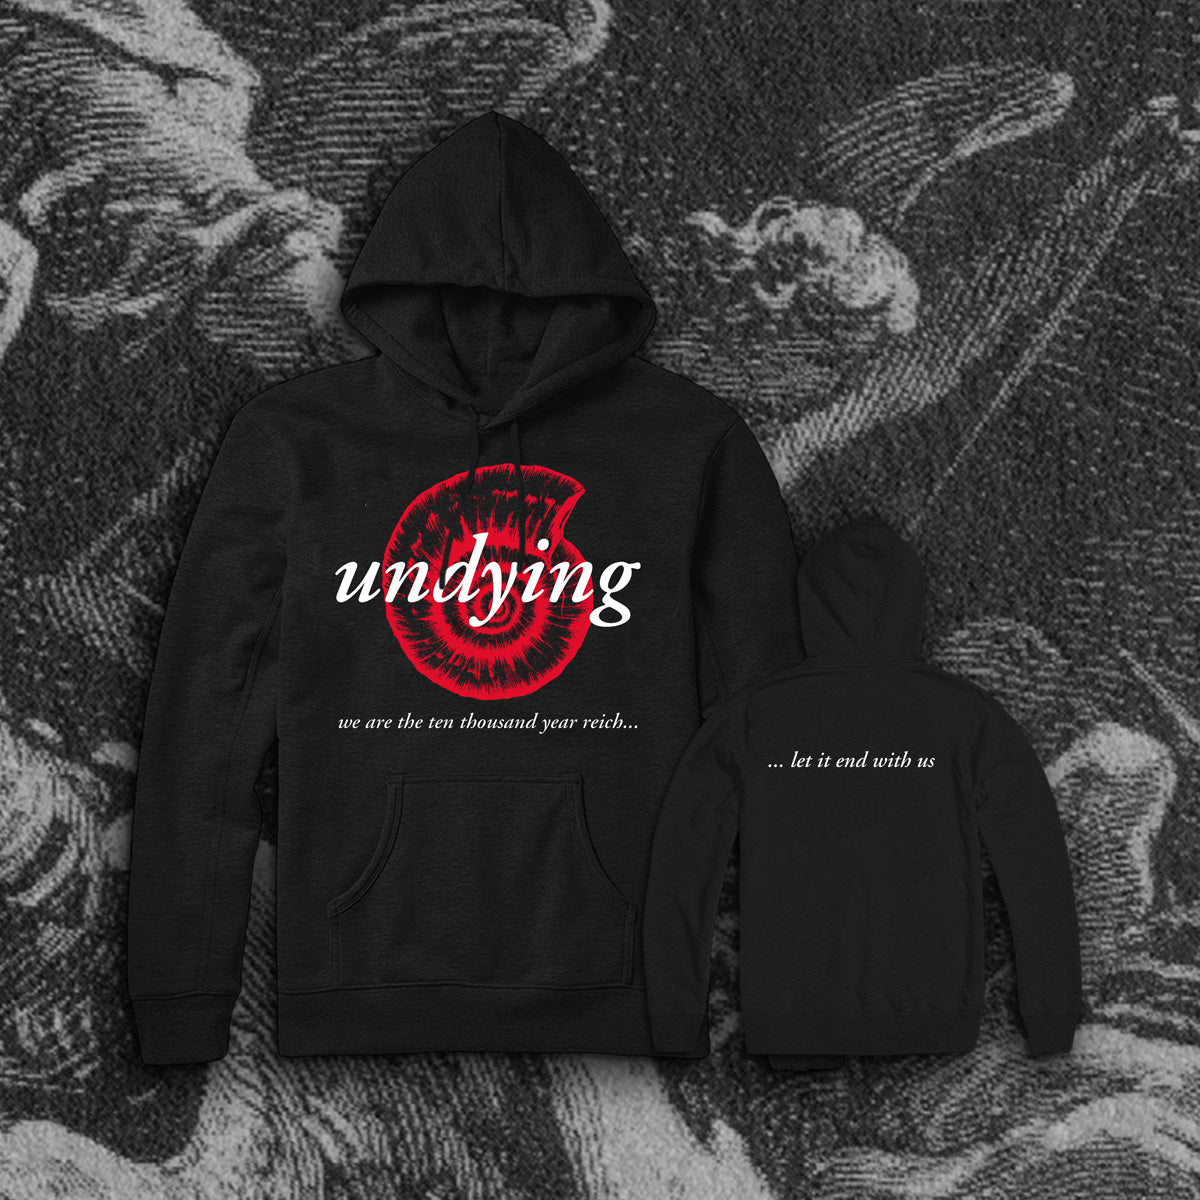 UNDYING "LET IT END" PULLOVER HOOD